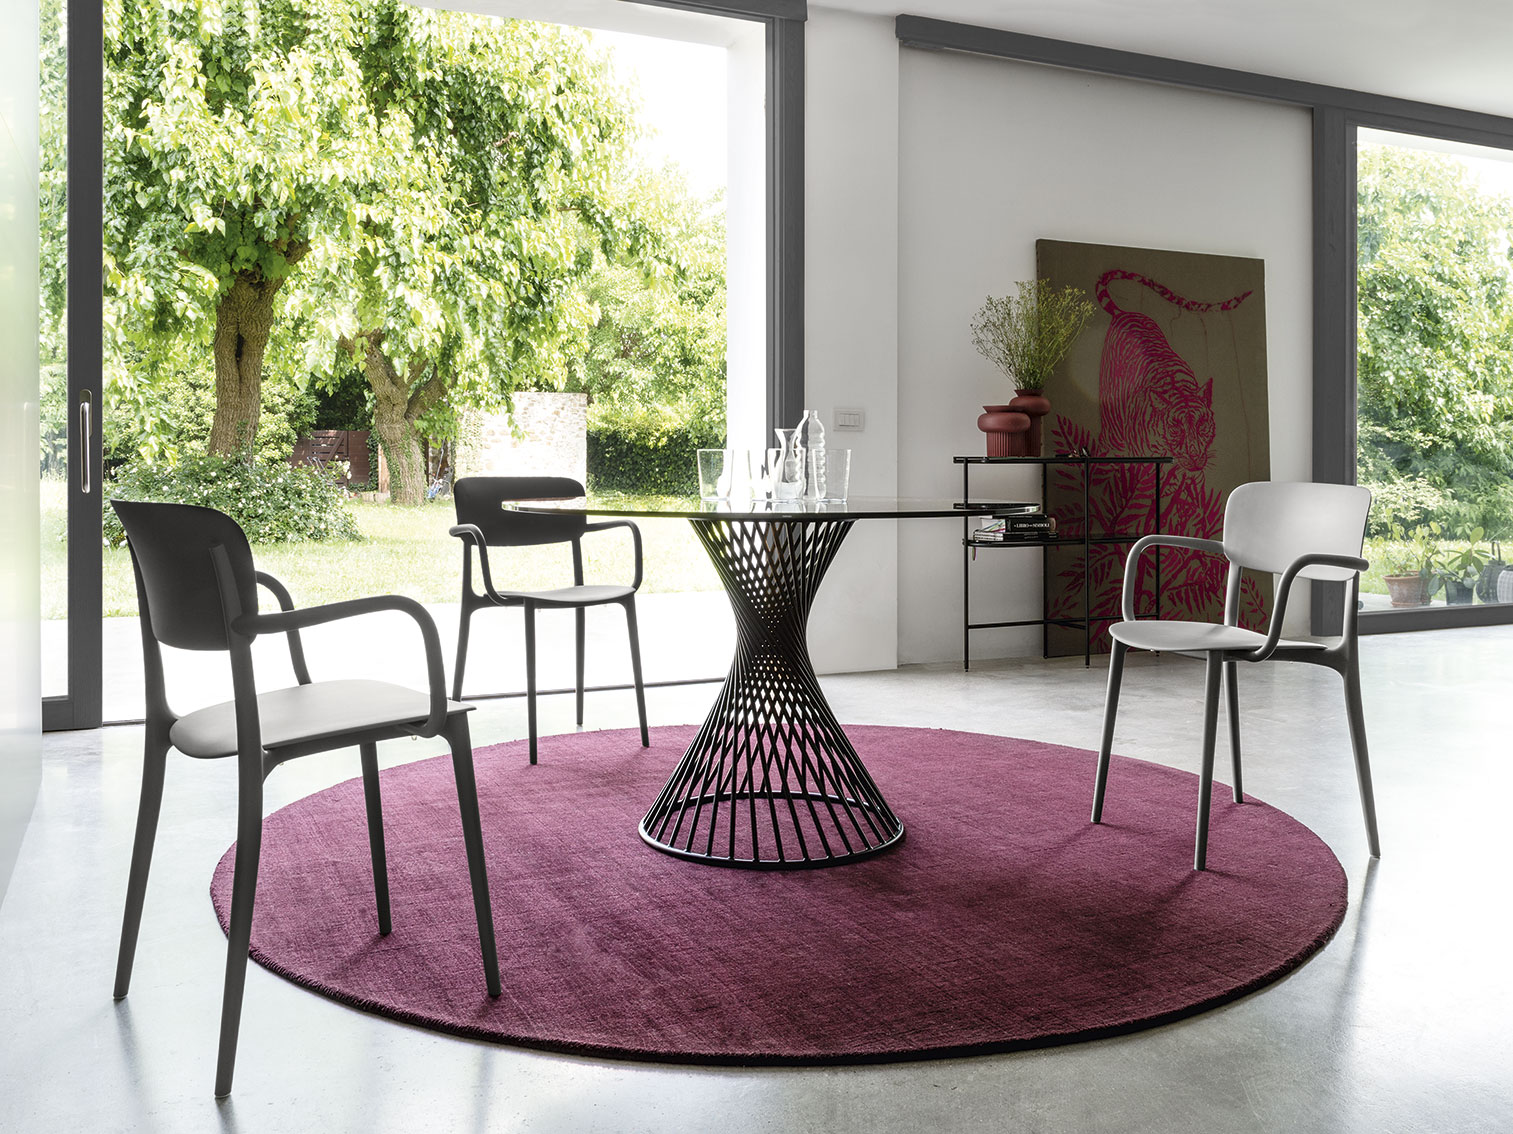 Chaise LIBERTY Calligaris rose poudre